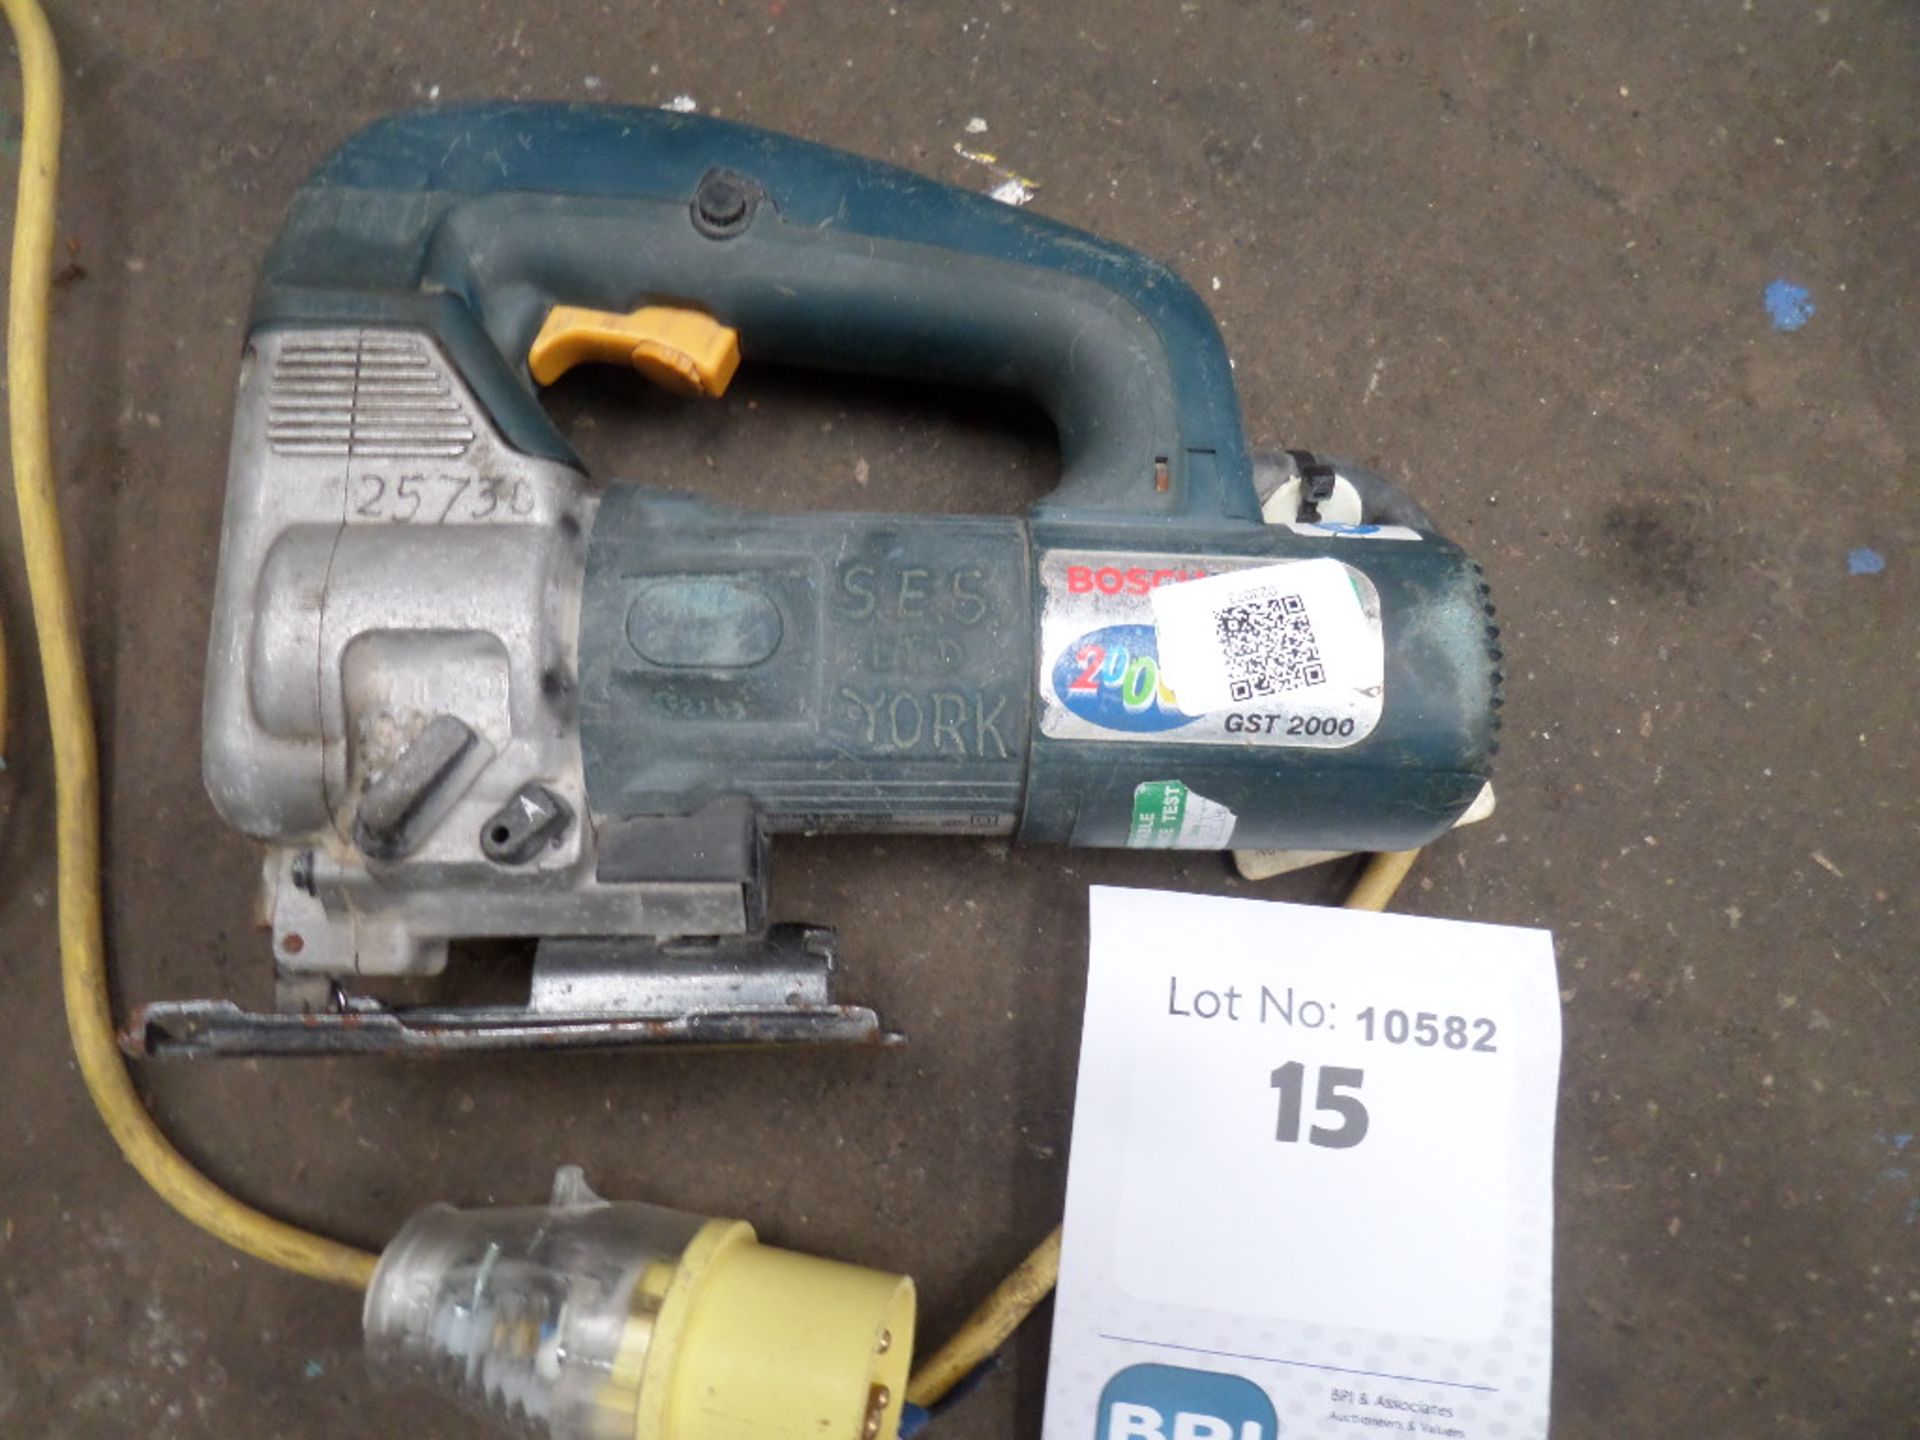 BOSCH GST2000 {023073} JIG SAW 110V 16amp connection and is working fine.